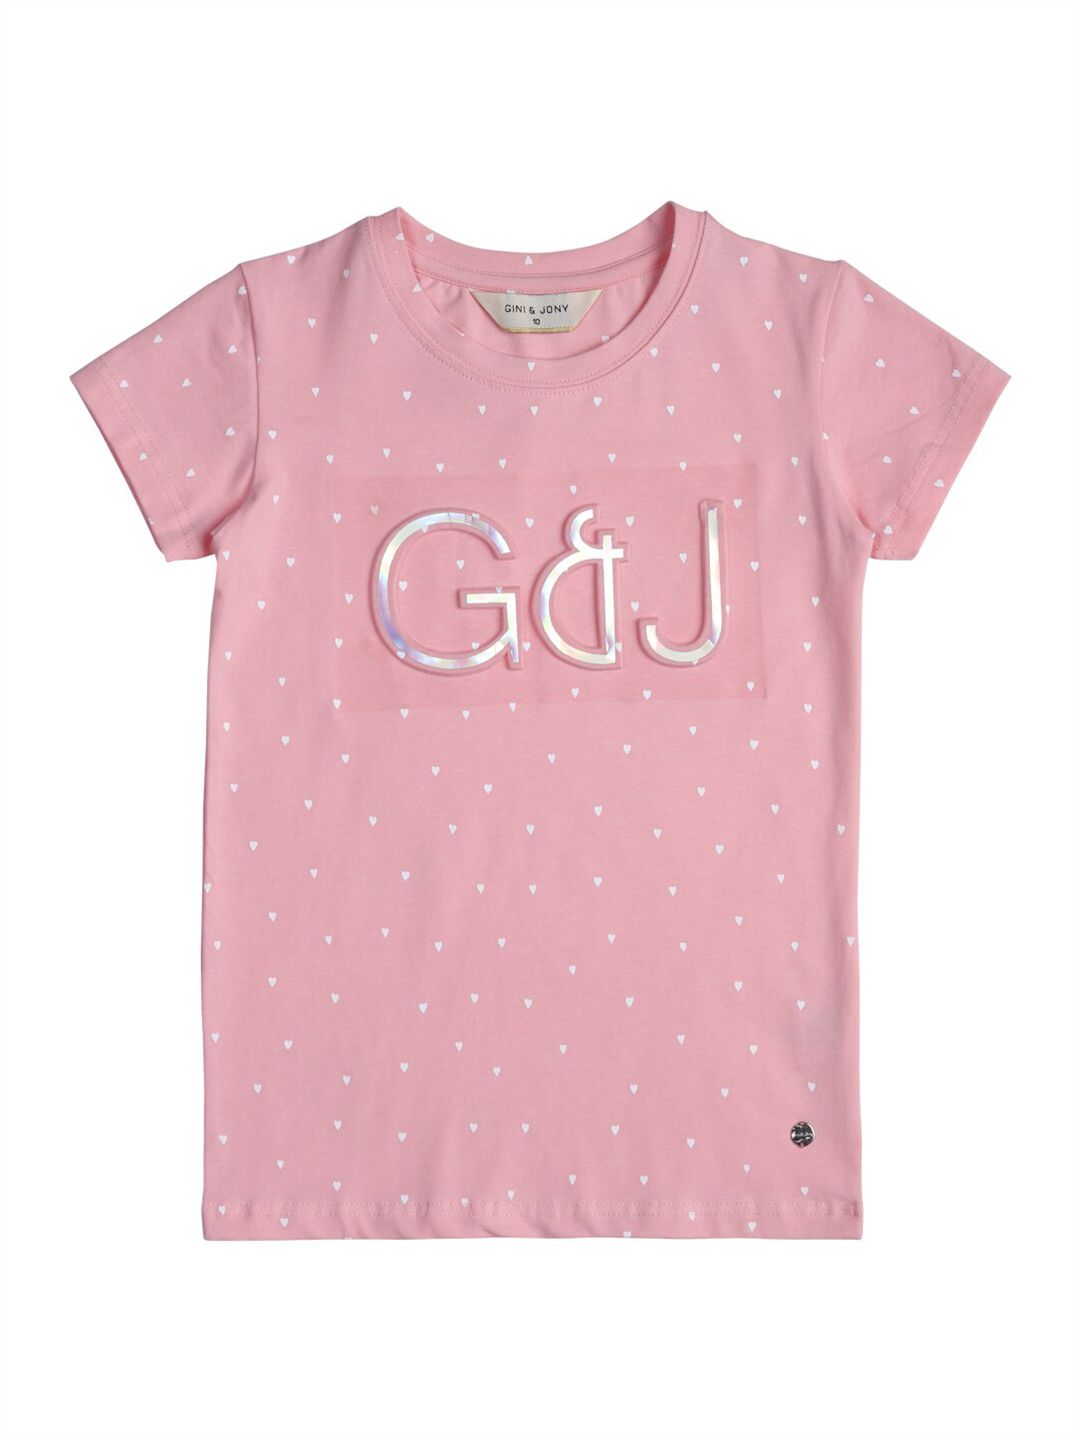 Gini and Jony Printed Round Neck Cotton Top Price in India